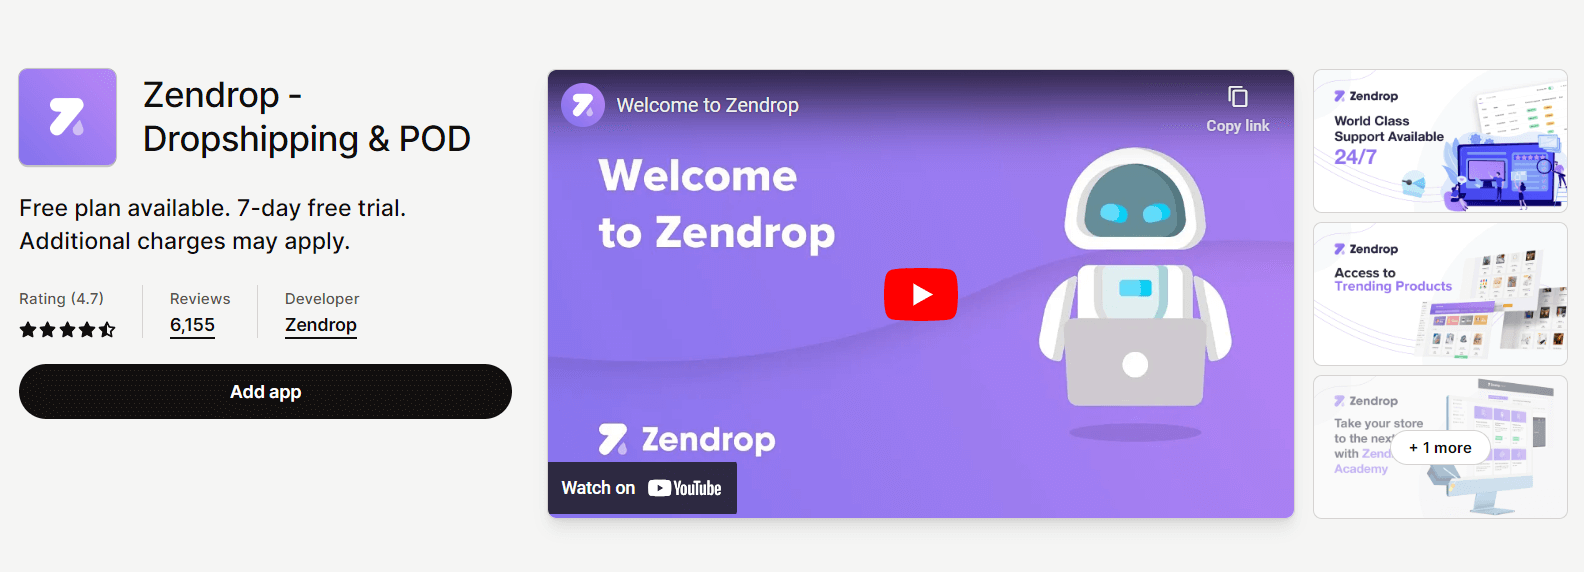 Shopify dropshipping apps - Zendrop